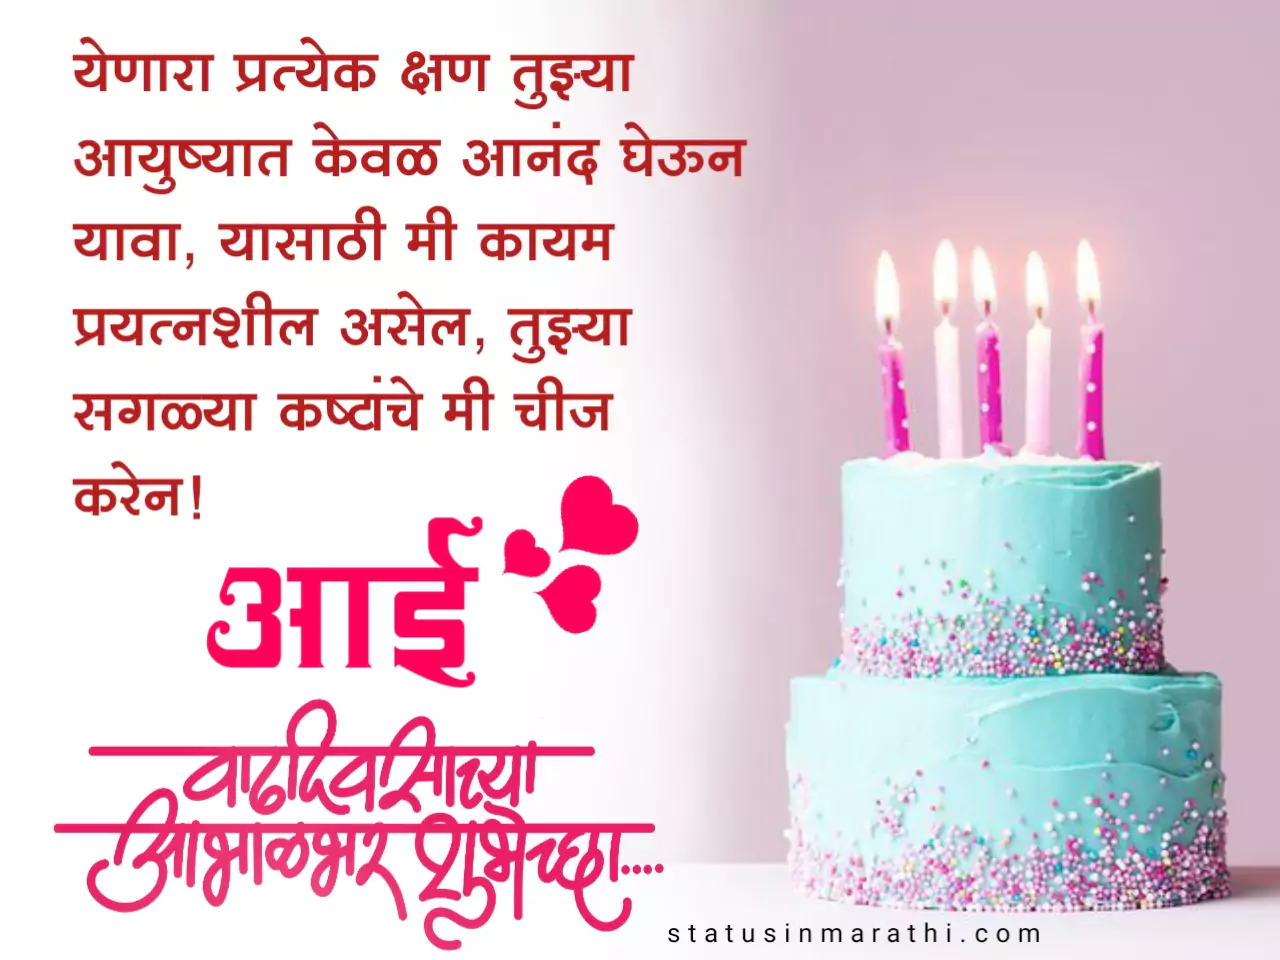 Happy Birthday Greetings for mother in marathi